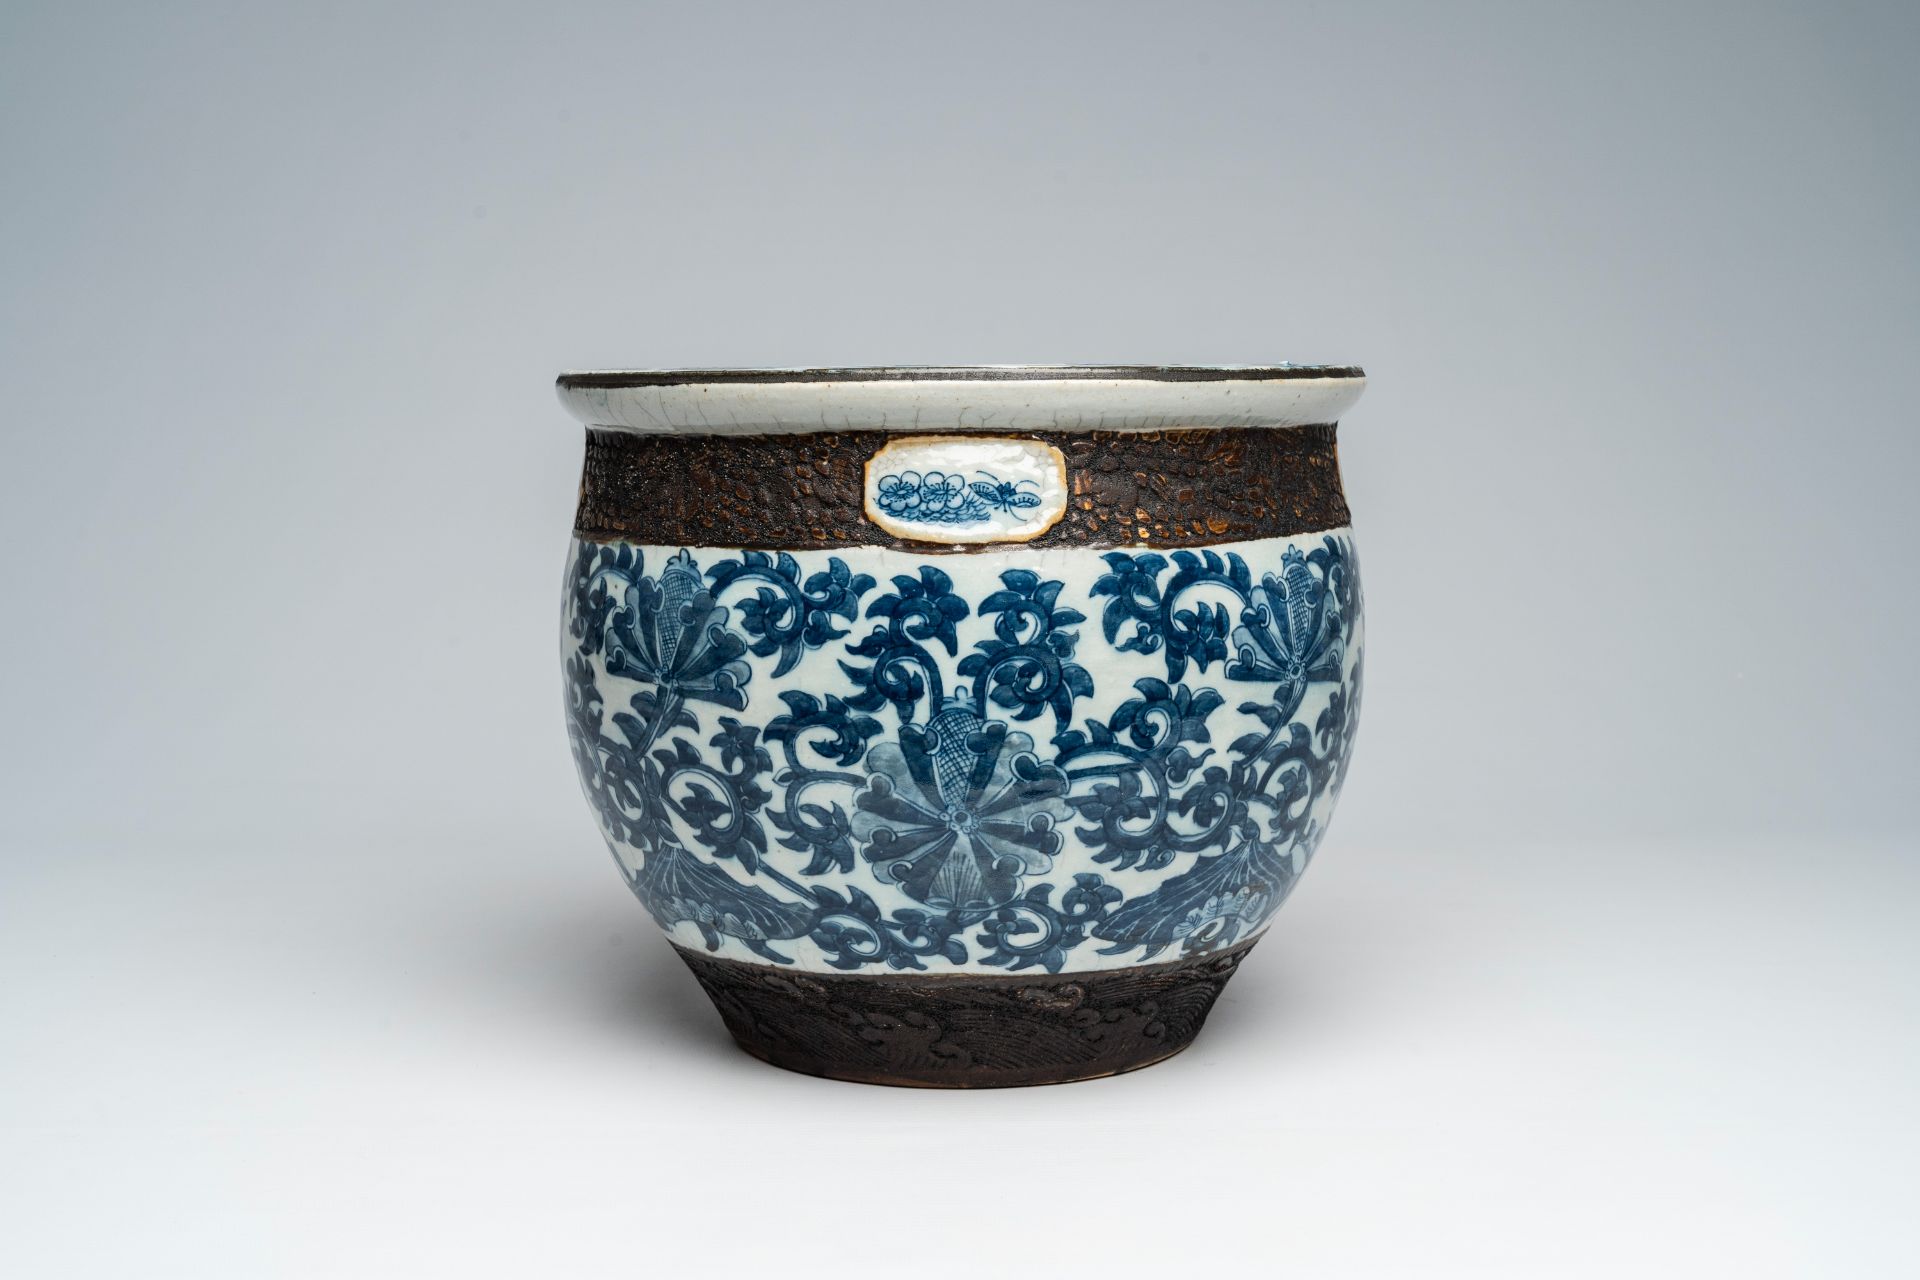 A Chinese Nanking craquelÃ© blue and white jardiniÃ¨re with floral design, 19th C. - Image 2 of 7